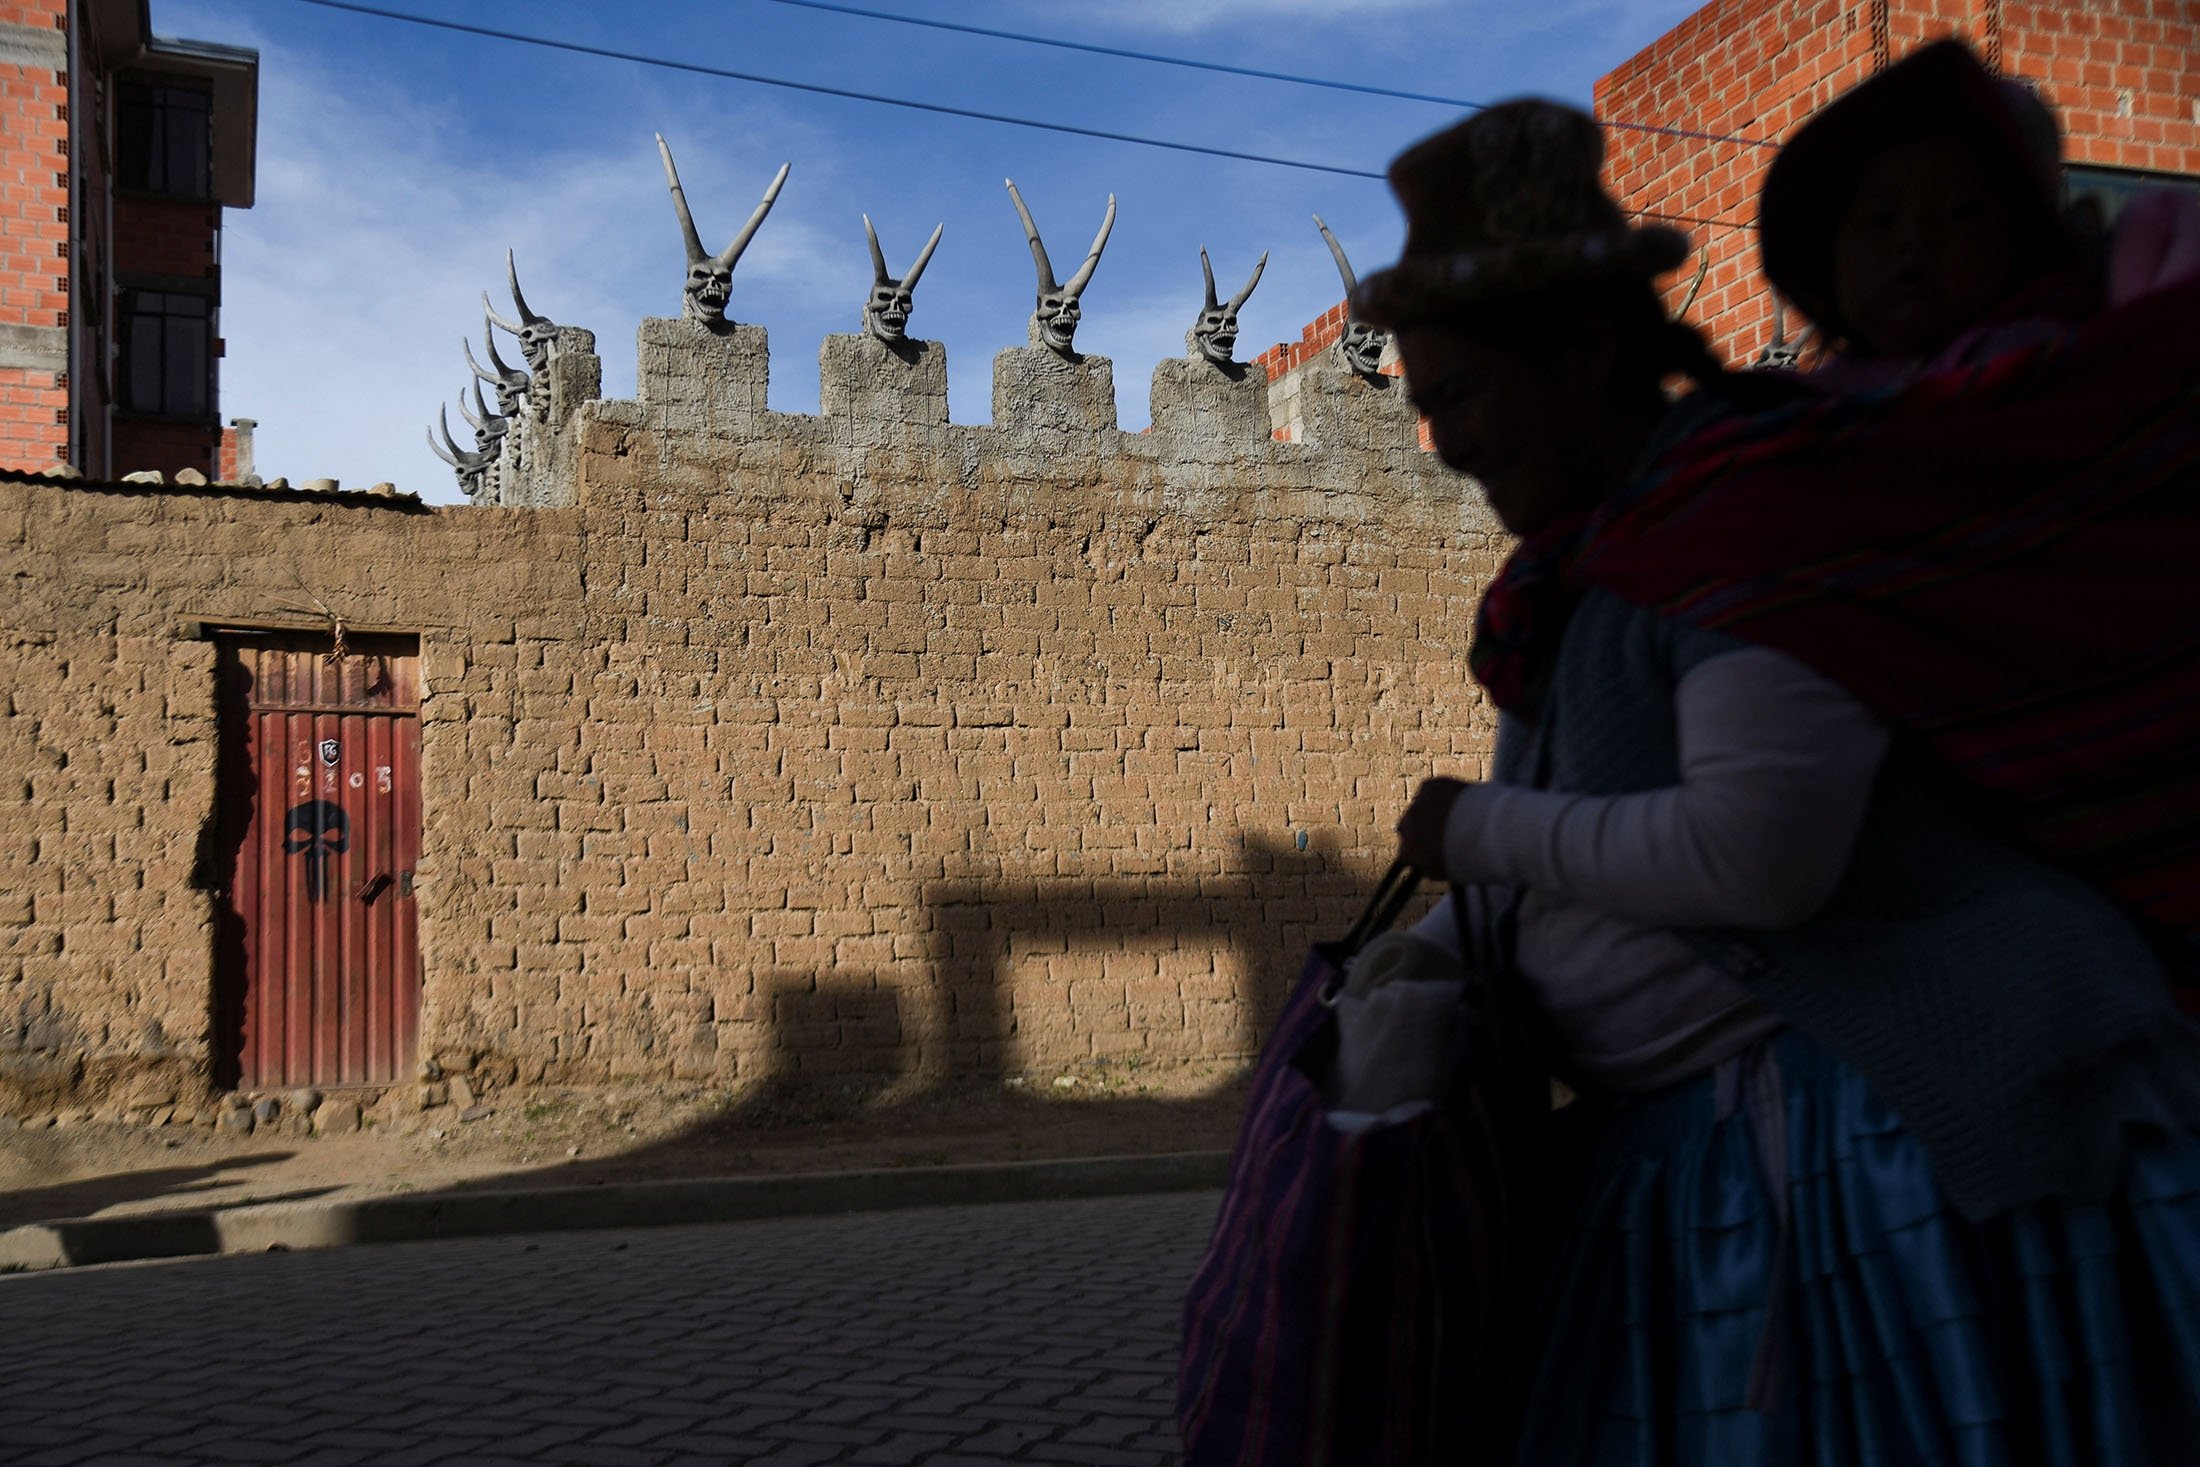 A woman walks past the house of Bolivian miner David Choque who has covered his house with sculptures of horned devils, in El Alto, Bolivia, Feb. 16, 2022. (Reuters Photo)